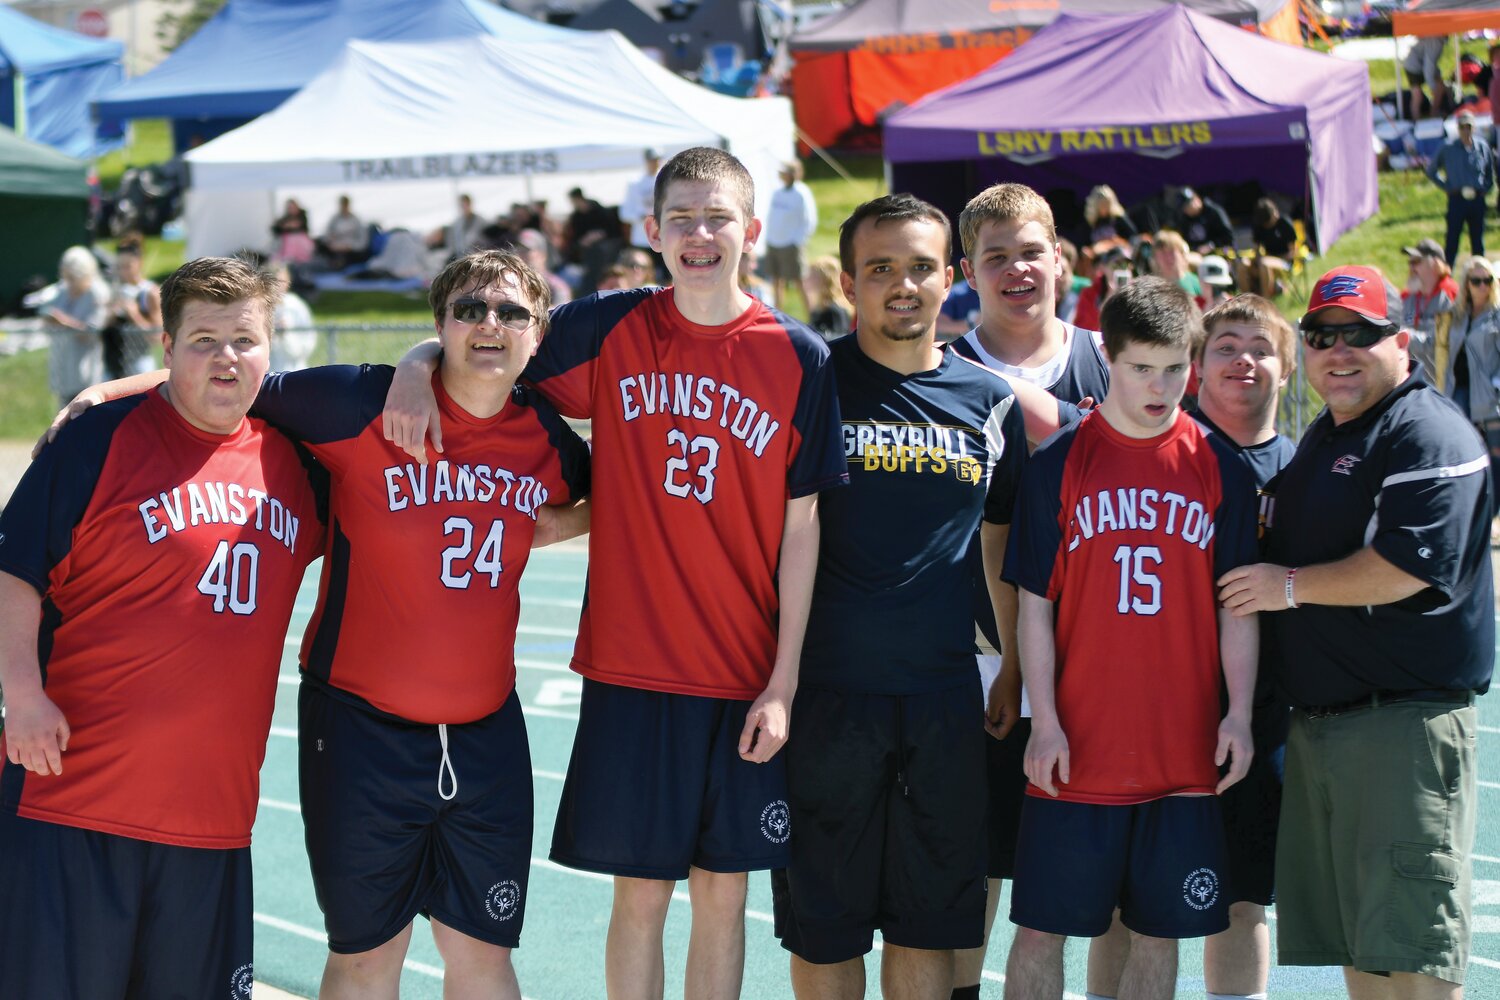 Members of the EHS unified track and field team that competed in the 100 meter dash included, from left: Homer Bodily, Shane Ruth, Hunter Brown, Landen Tethal and coach Dave Deru.